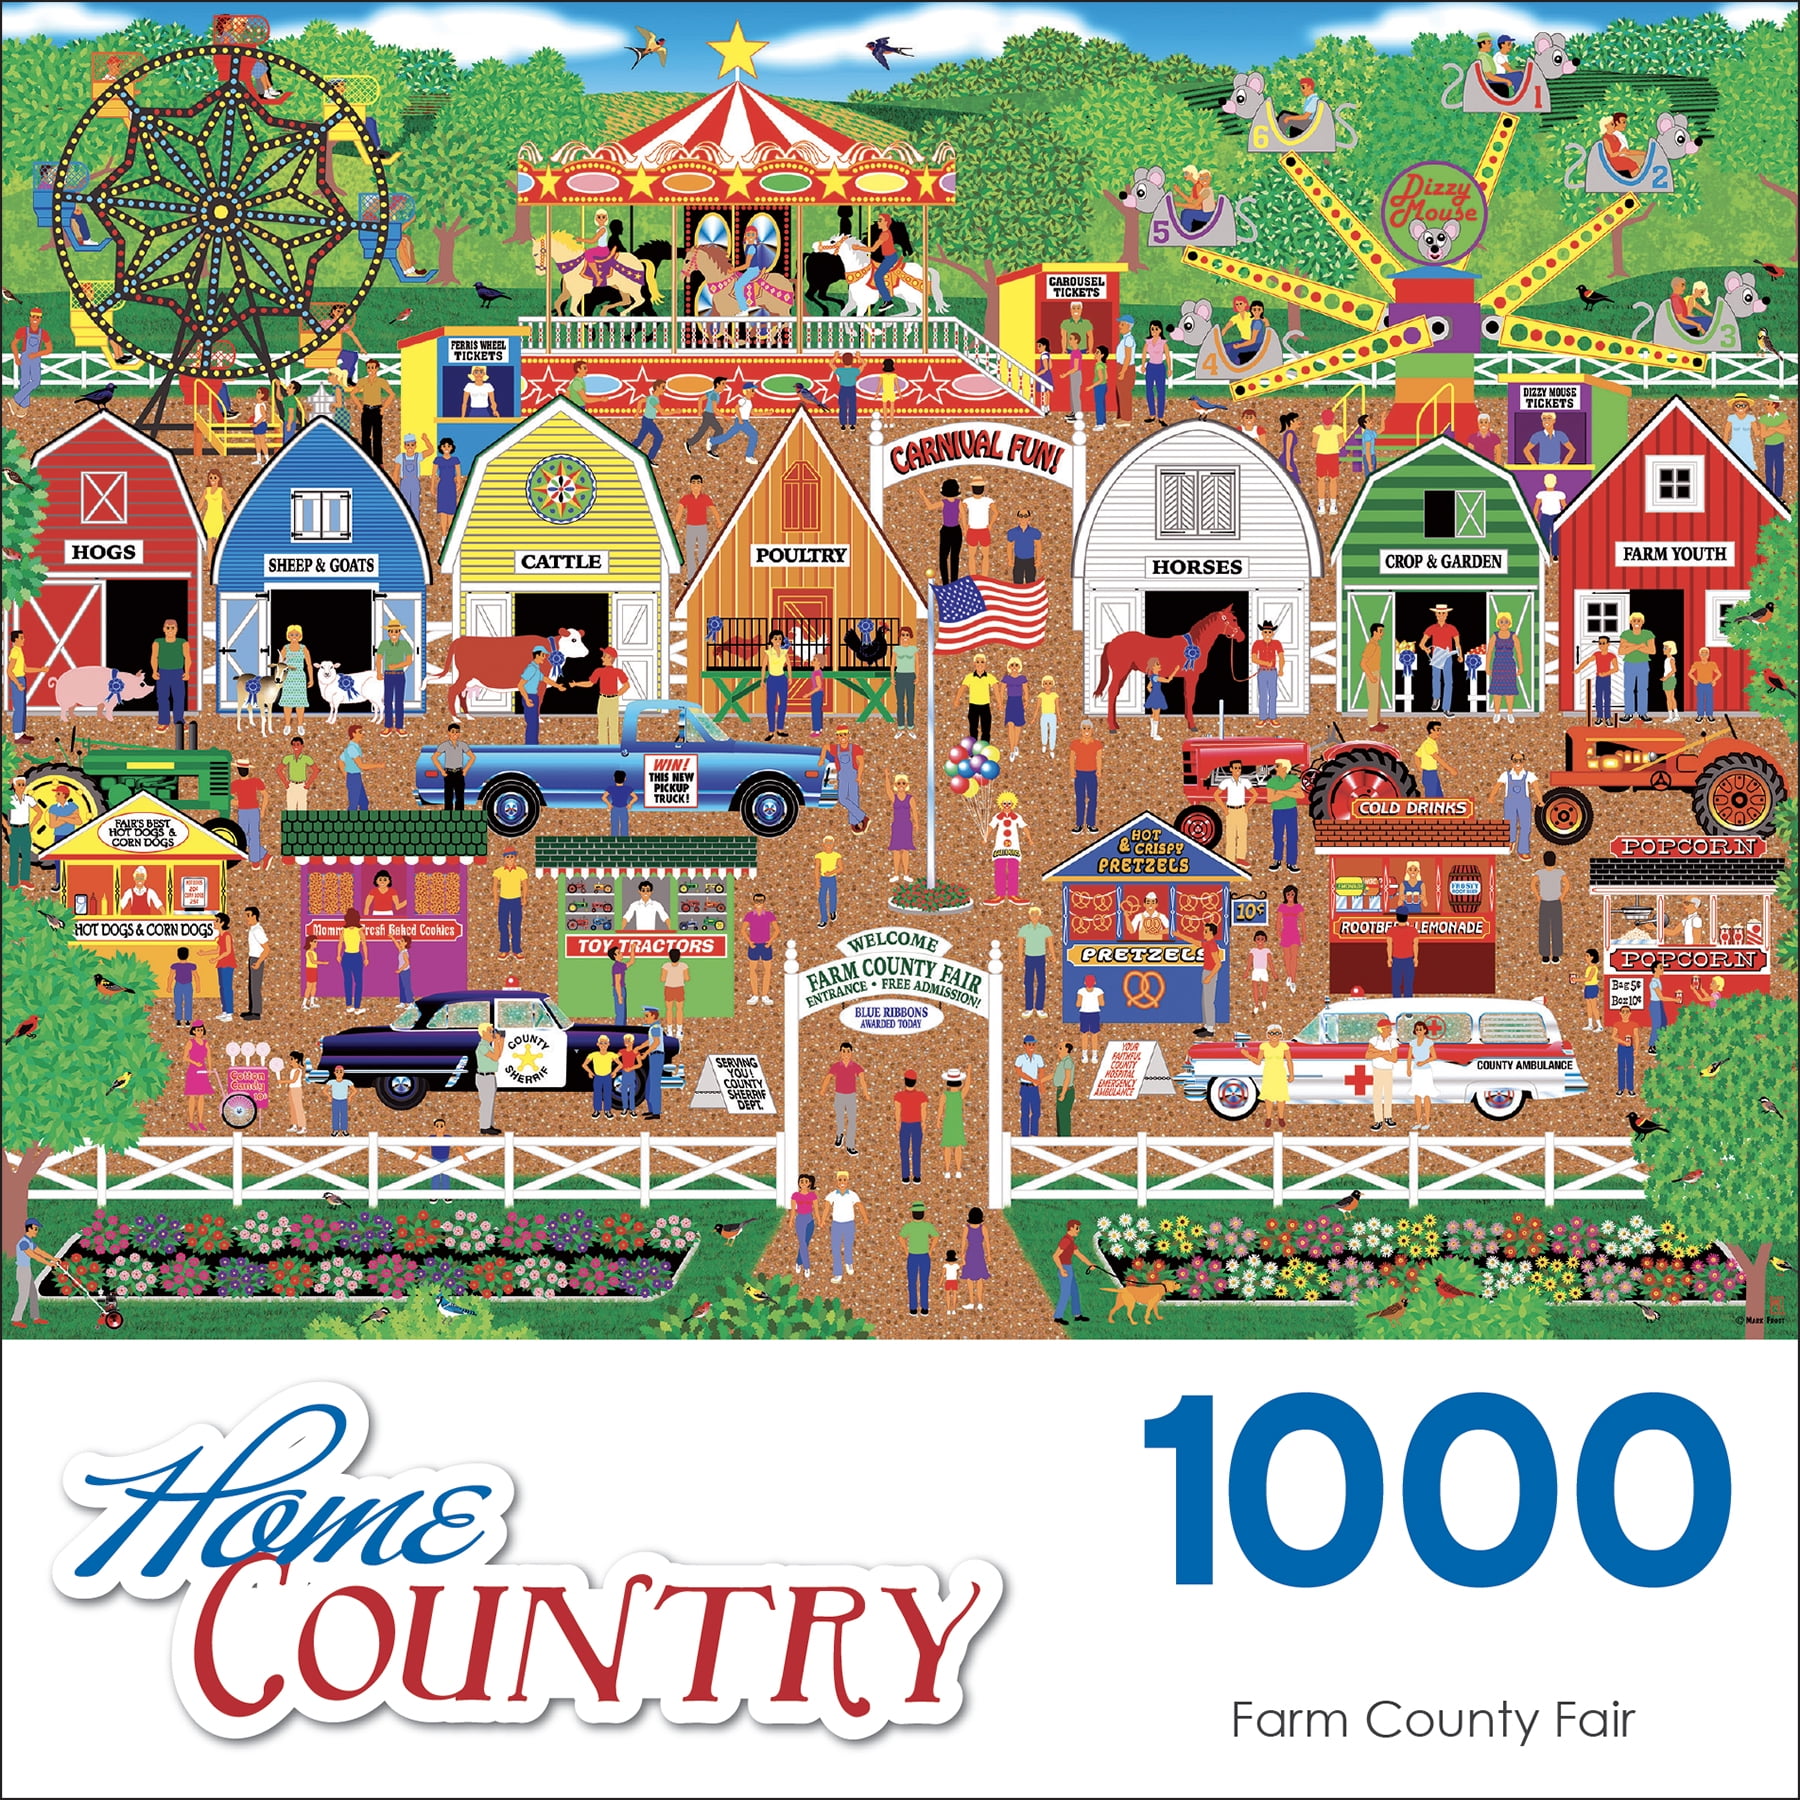 500 Piece Jigsaw Puzzle for Adults 500 pc Cows on the Farm Jigsaw by Artist Bob Fair Dairy Farm Winter Bits and Pieces 